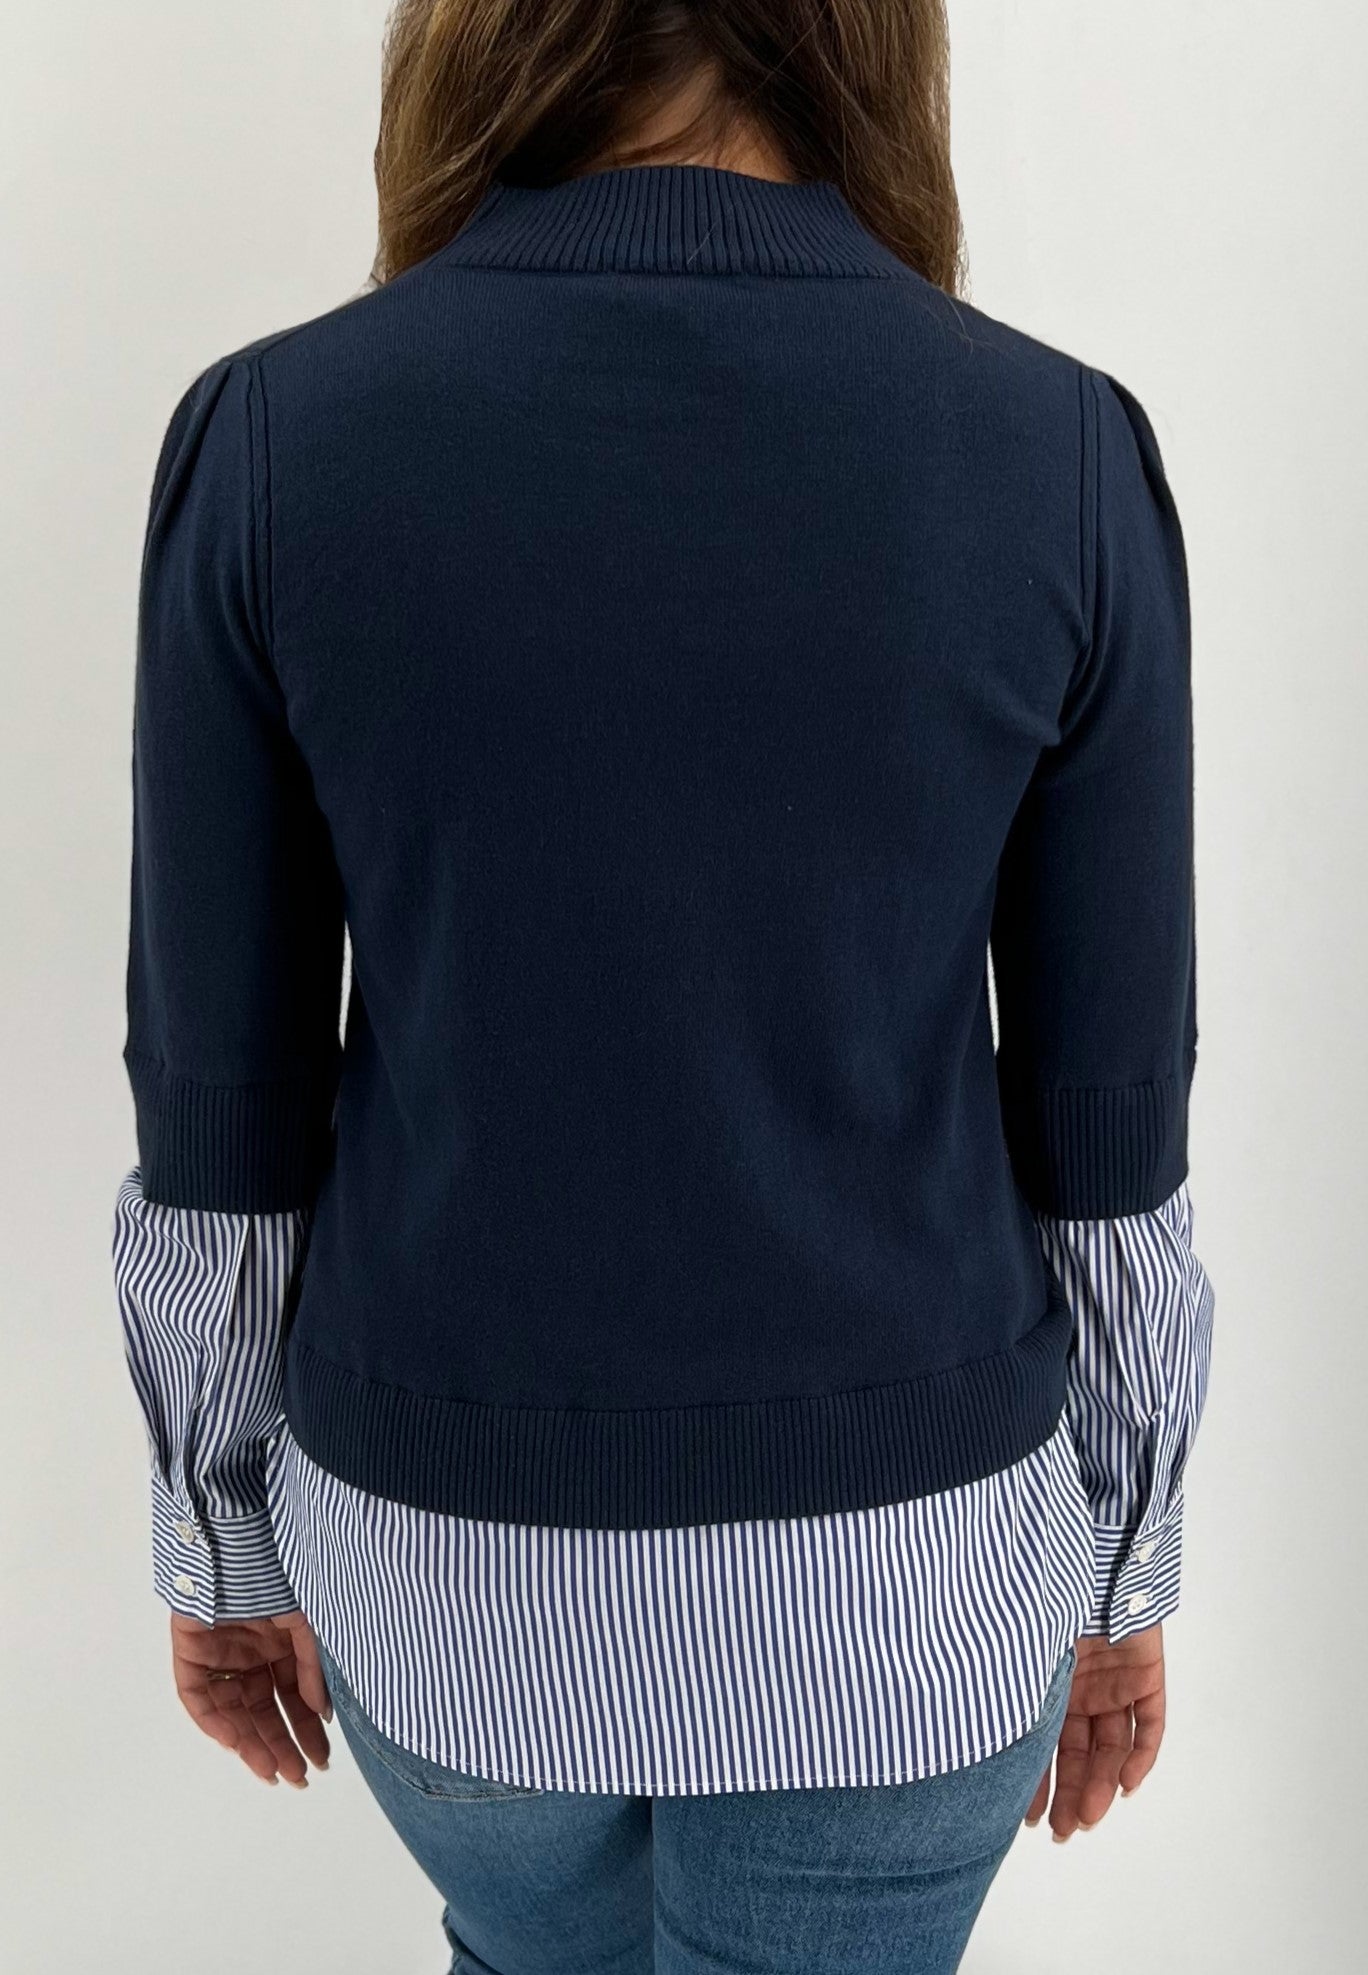 The Stripe Layered Crew Sweater in Navy